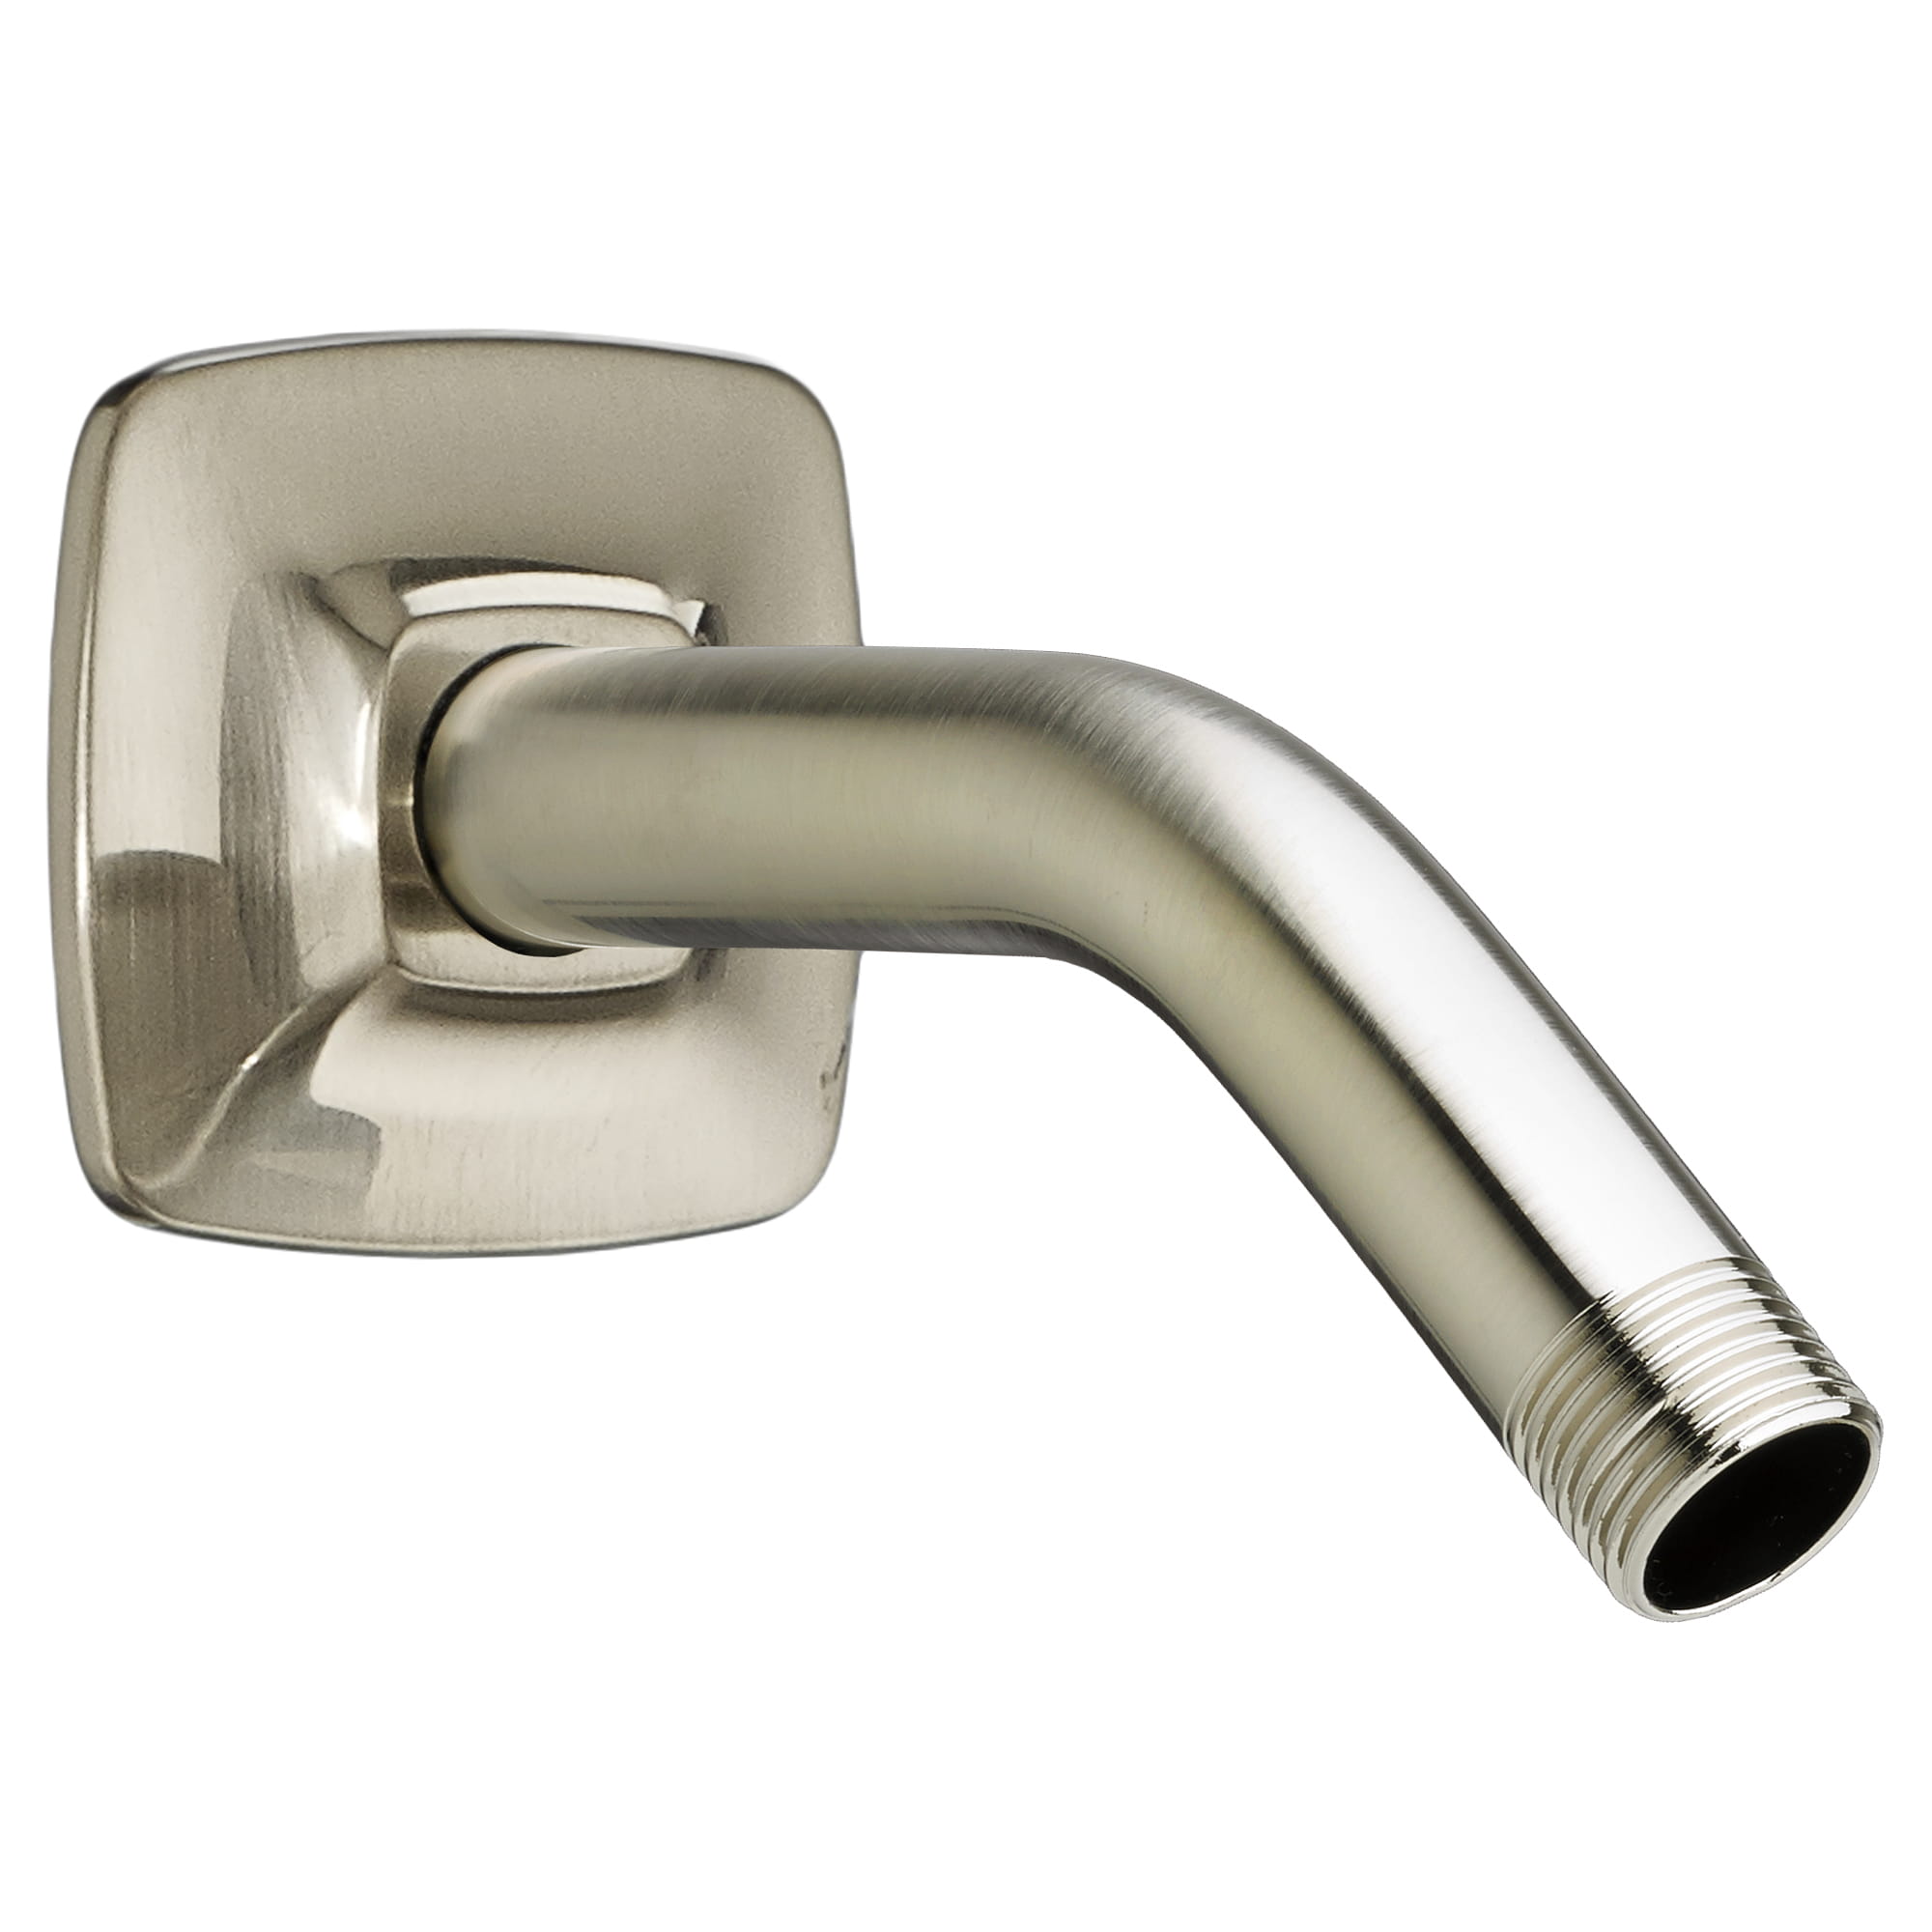 Townsend® Showerhead Arm and Flange